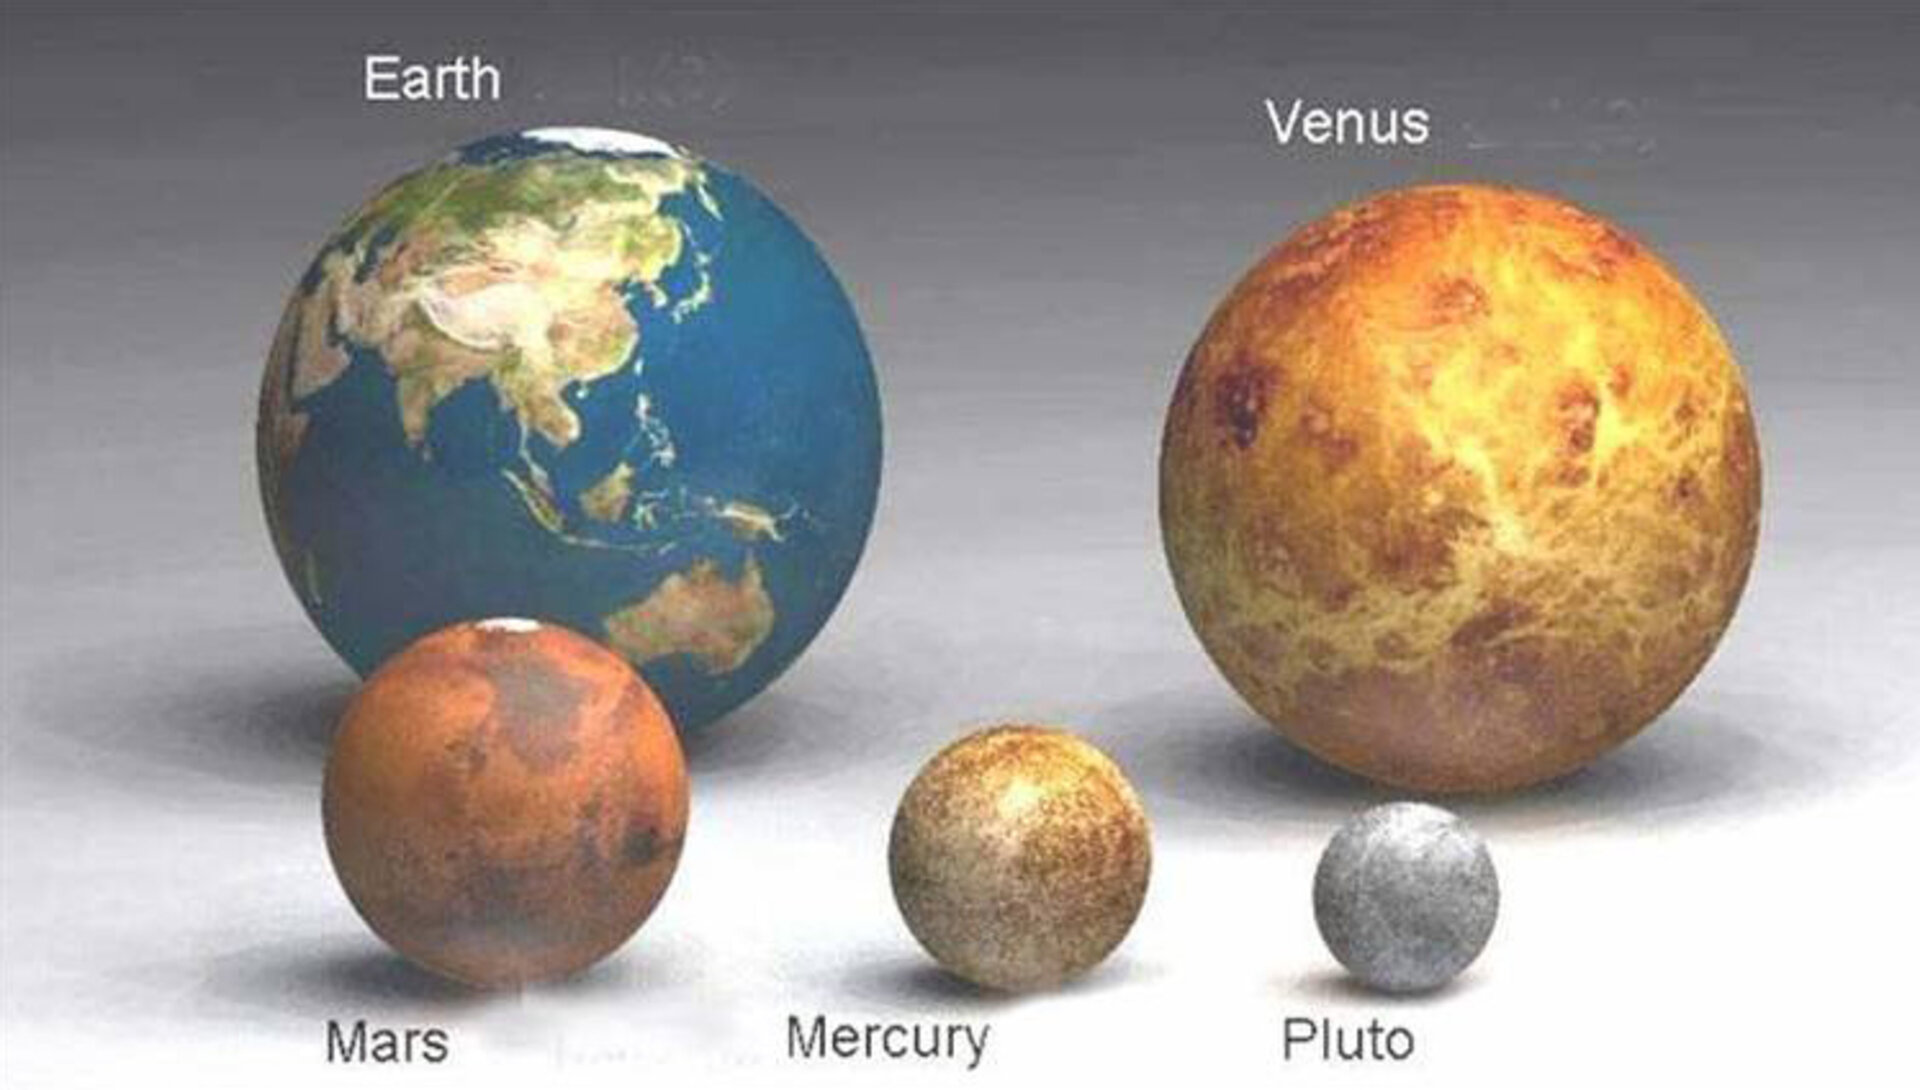 Models of the terrestrial planets to scale